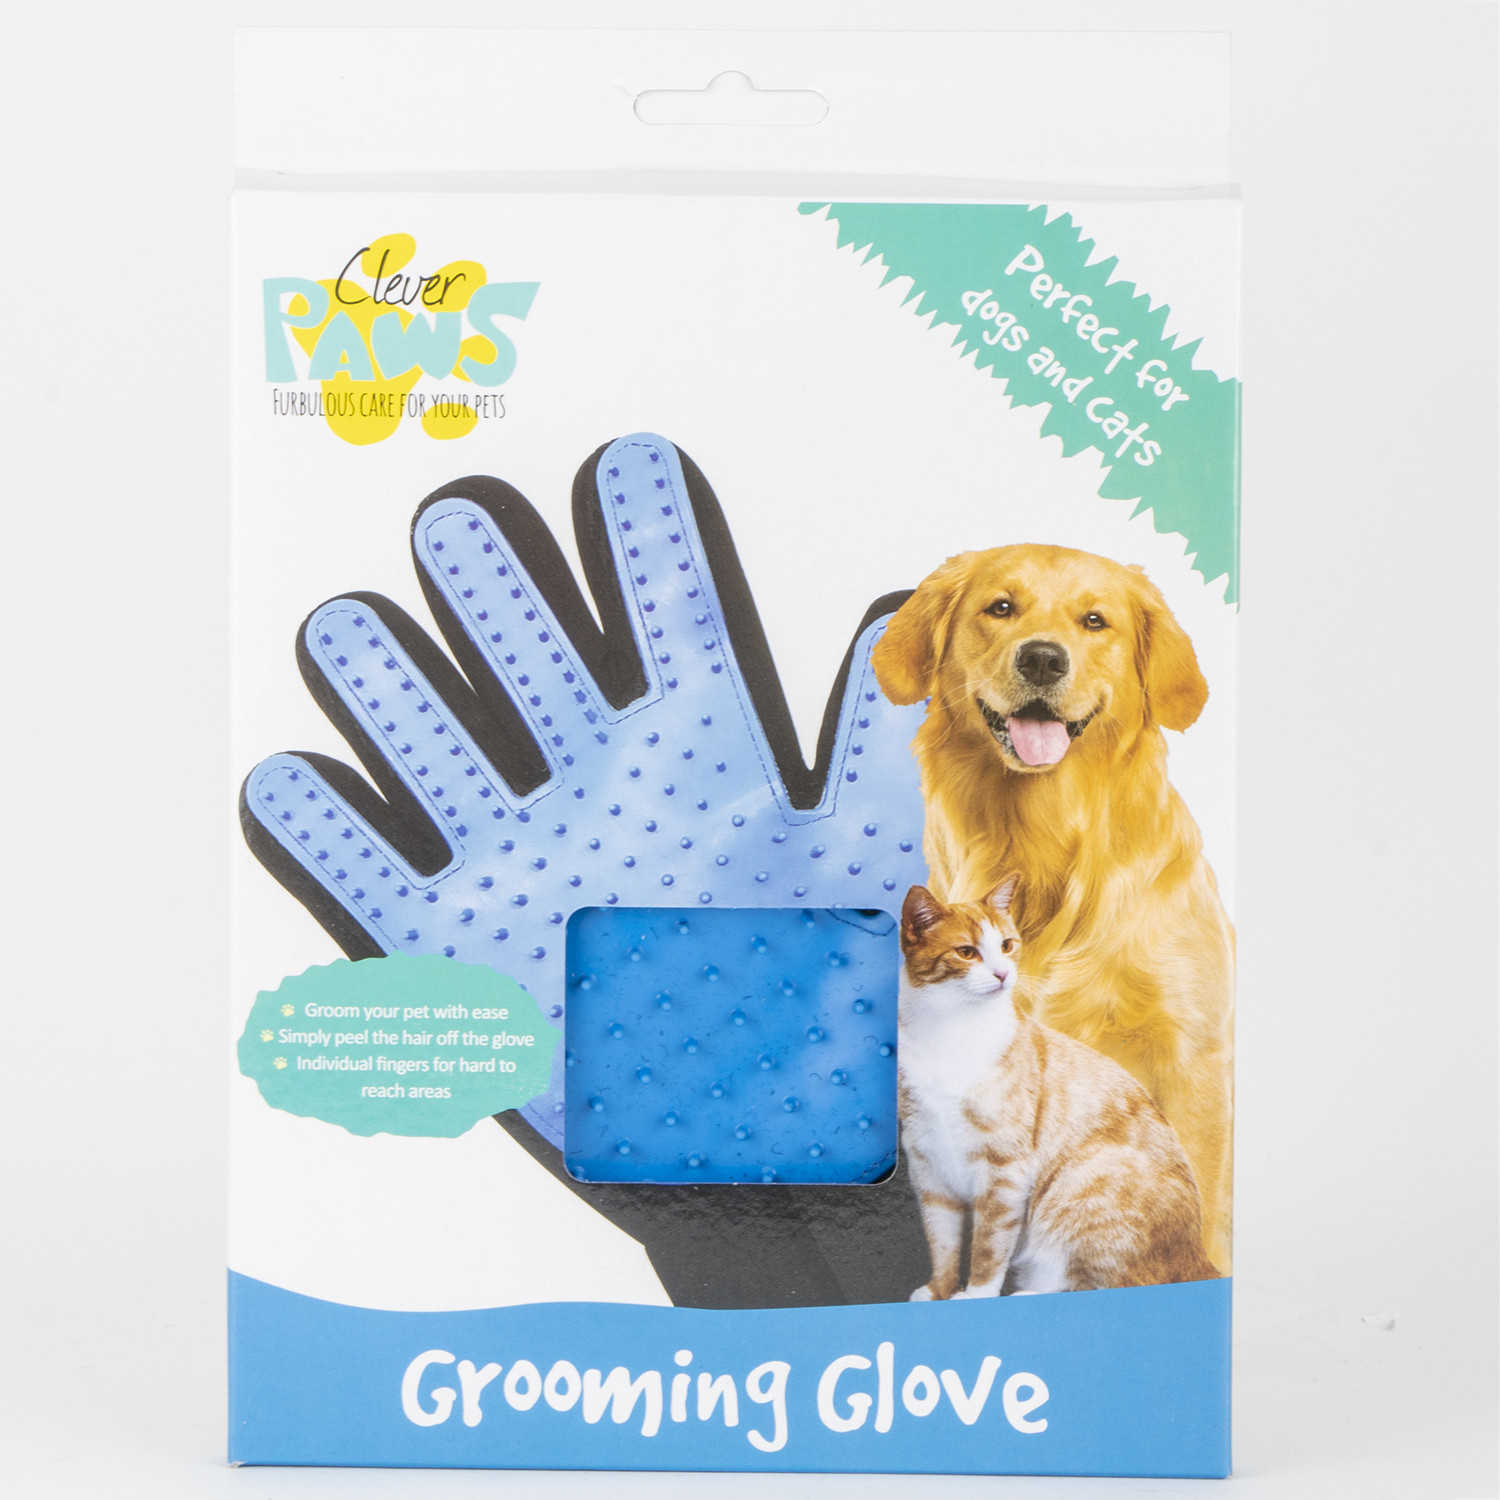 Clever Paws Grooming Glove Image